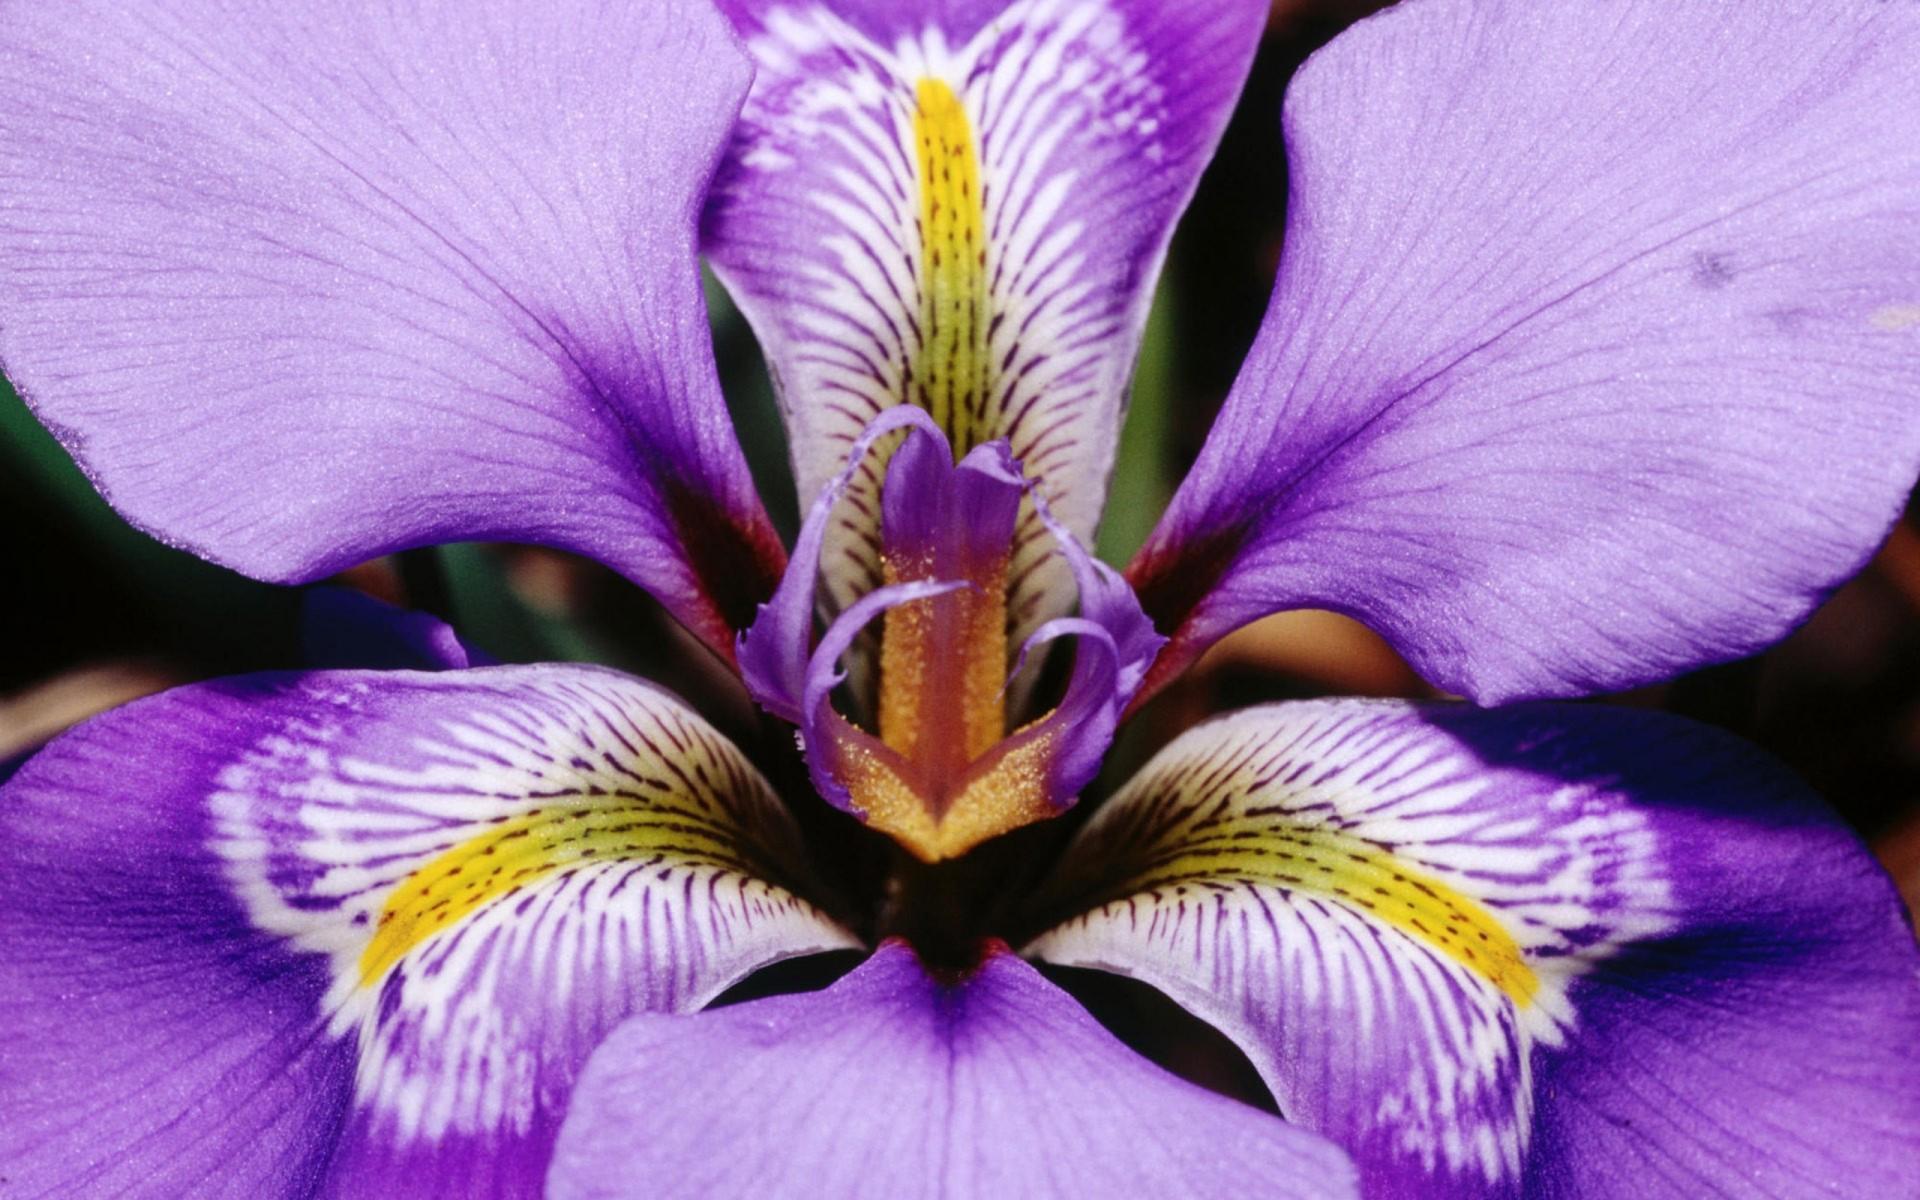 Purple iris on March 8 wallpaper and image